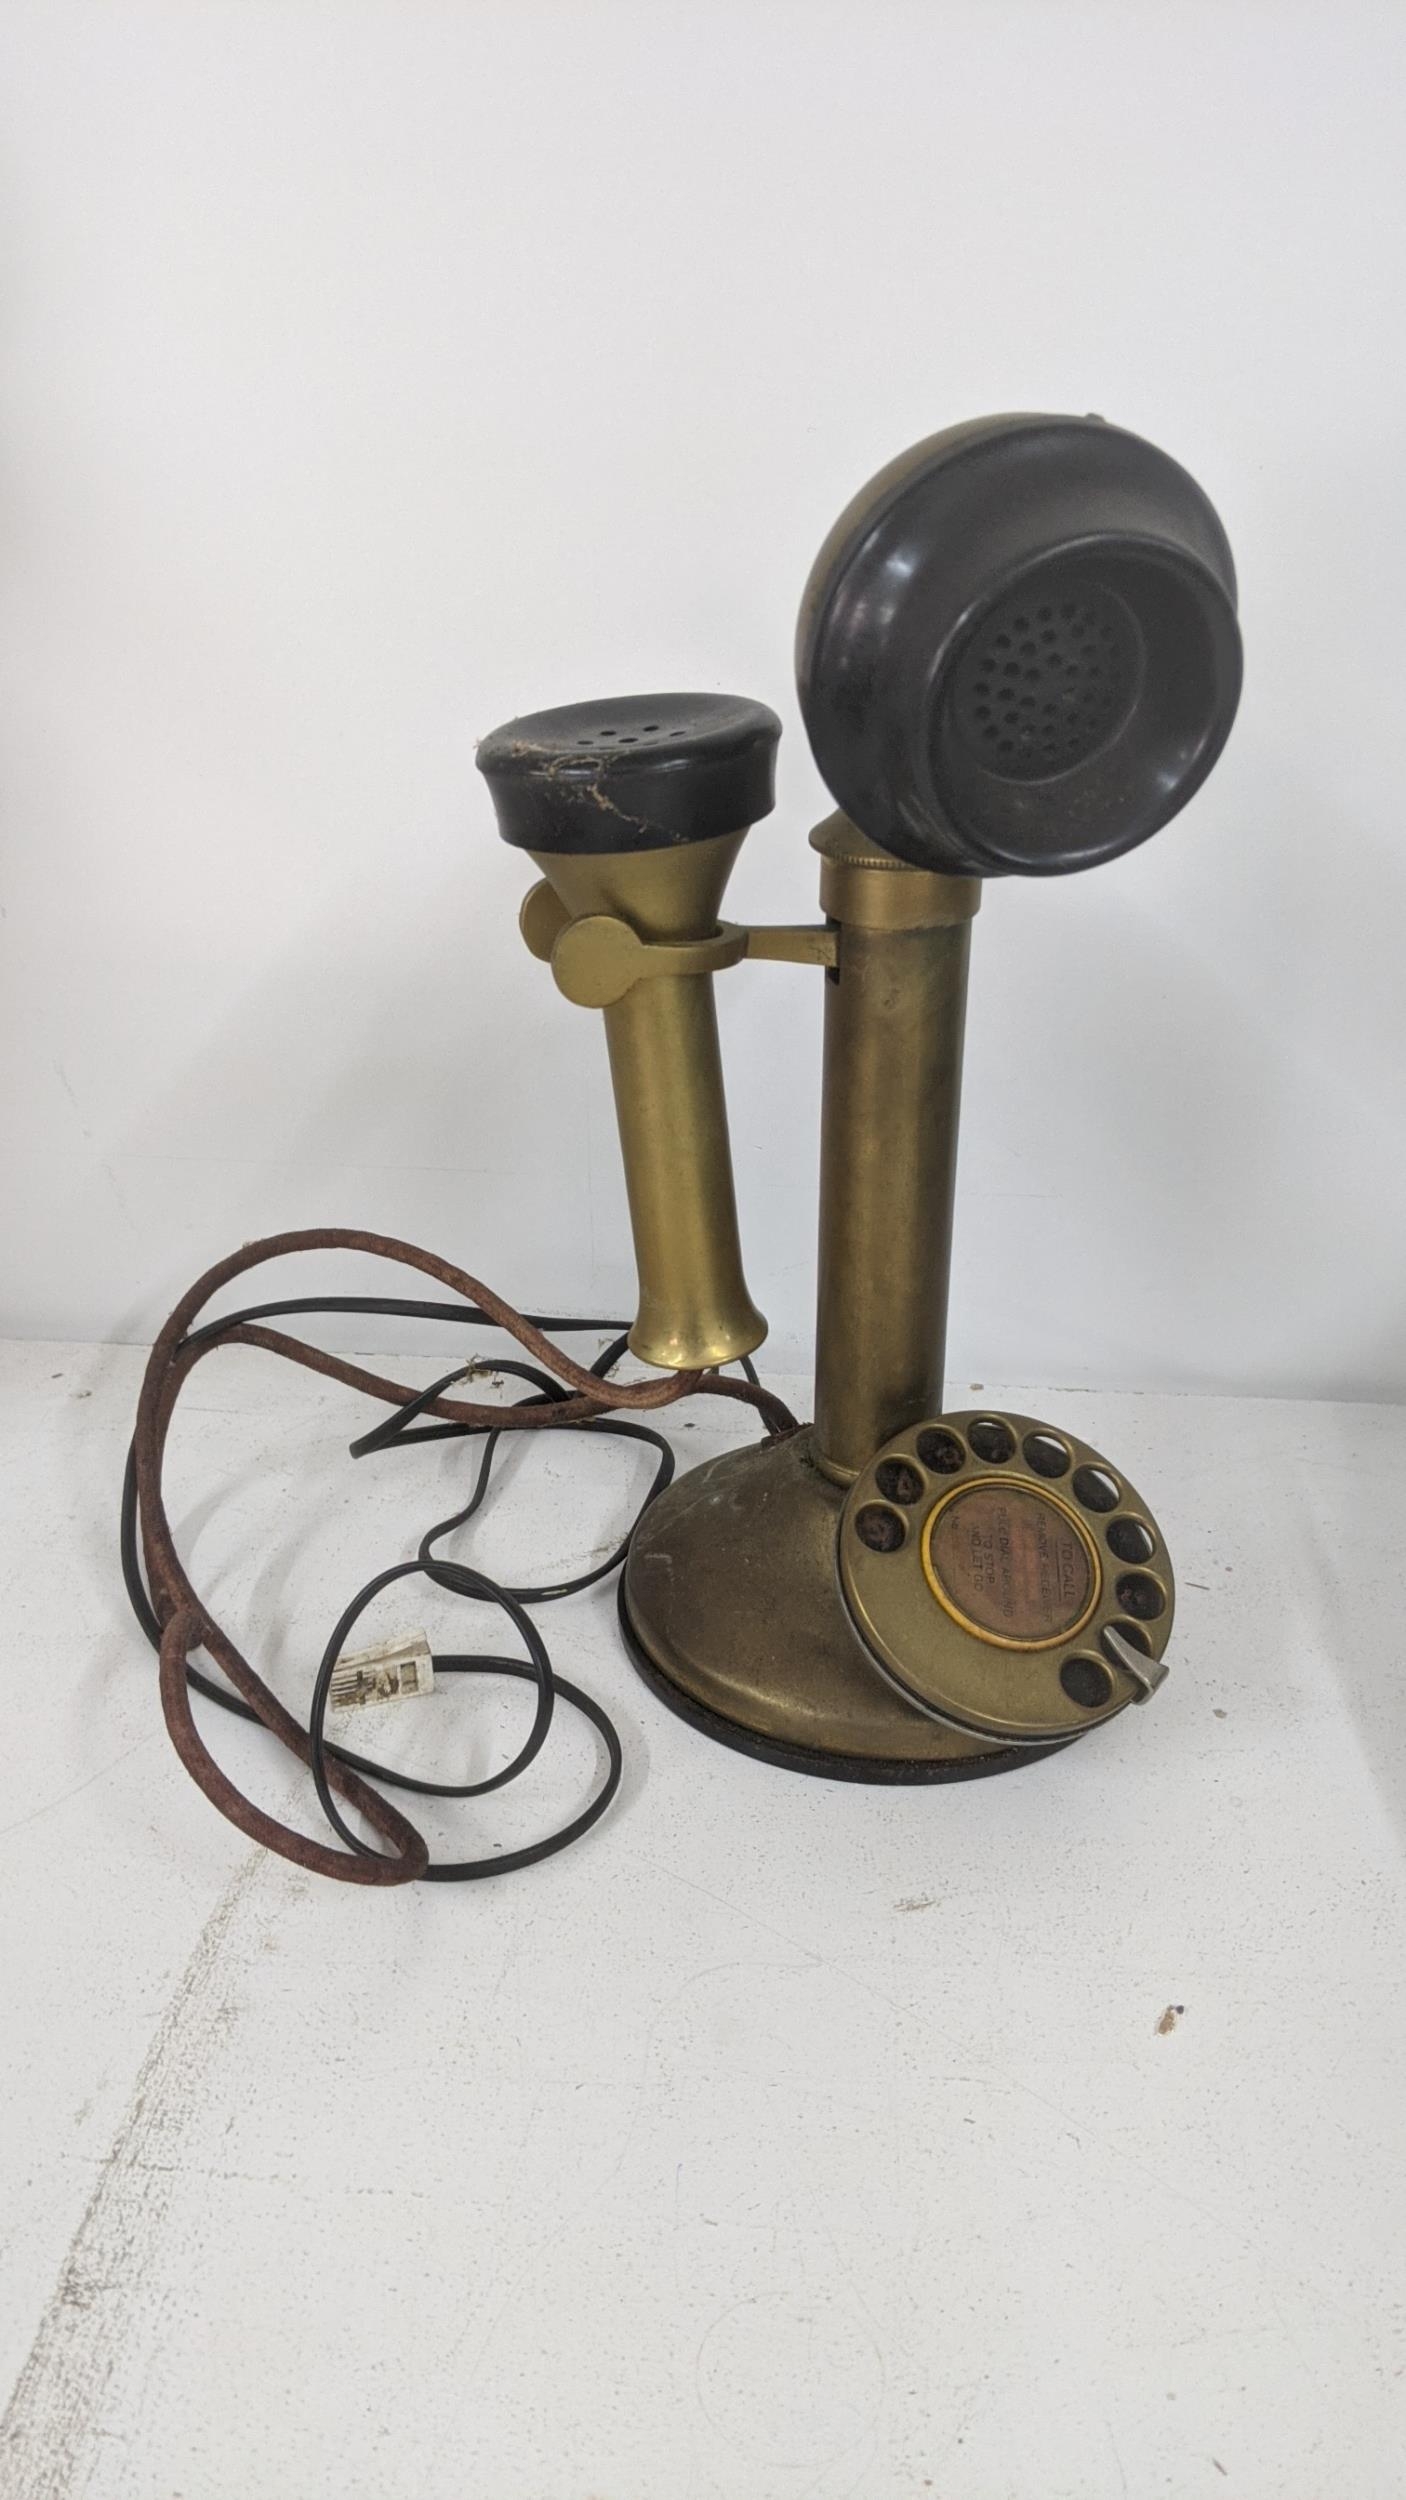 An early to mid 20th century brass candlestick telephone Location: If there is no condition report